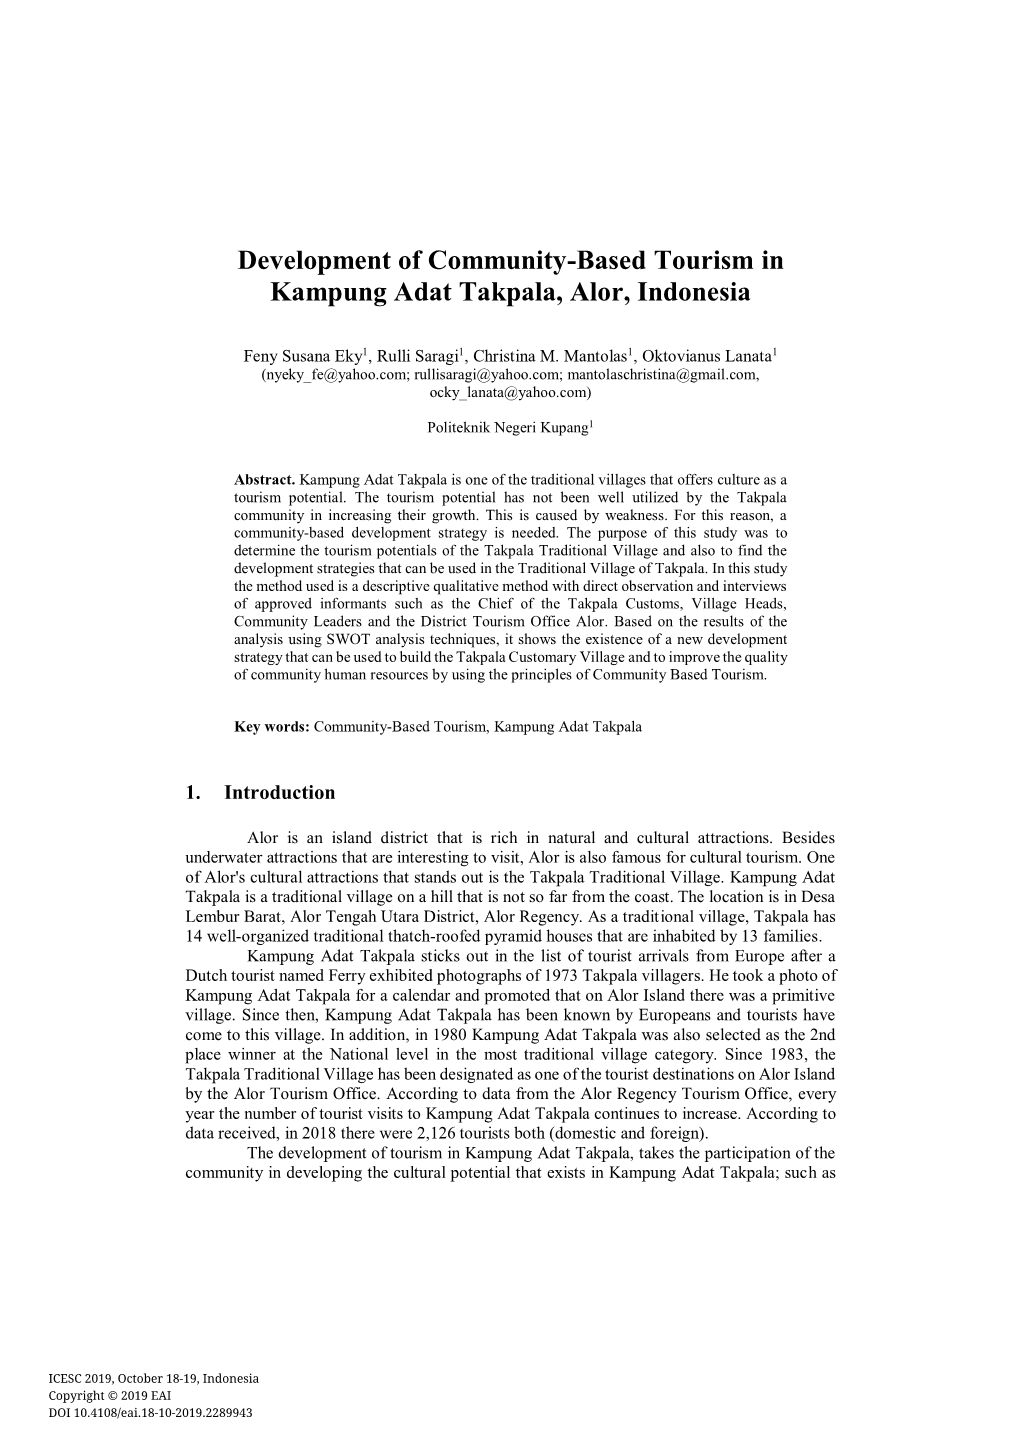 Development of Community-Based Tourism in Kampung Adat Takpala, Alor, Indonesia